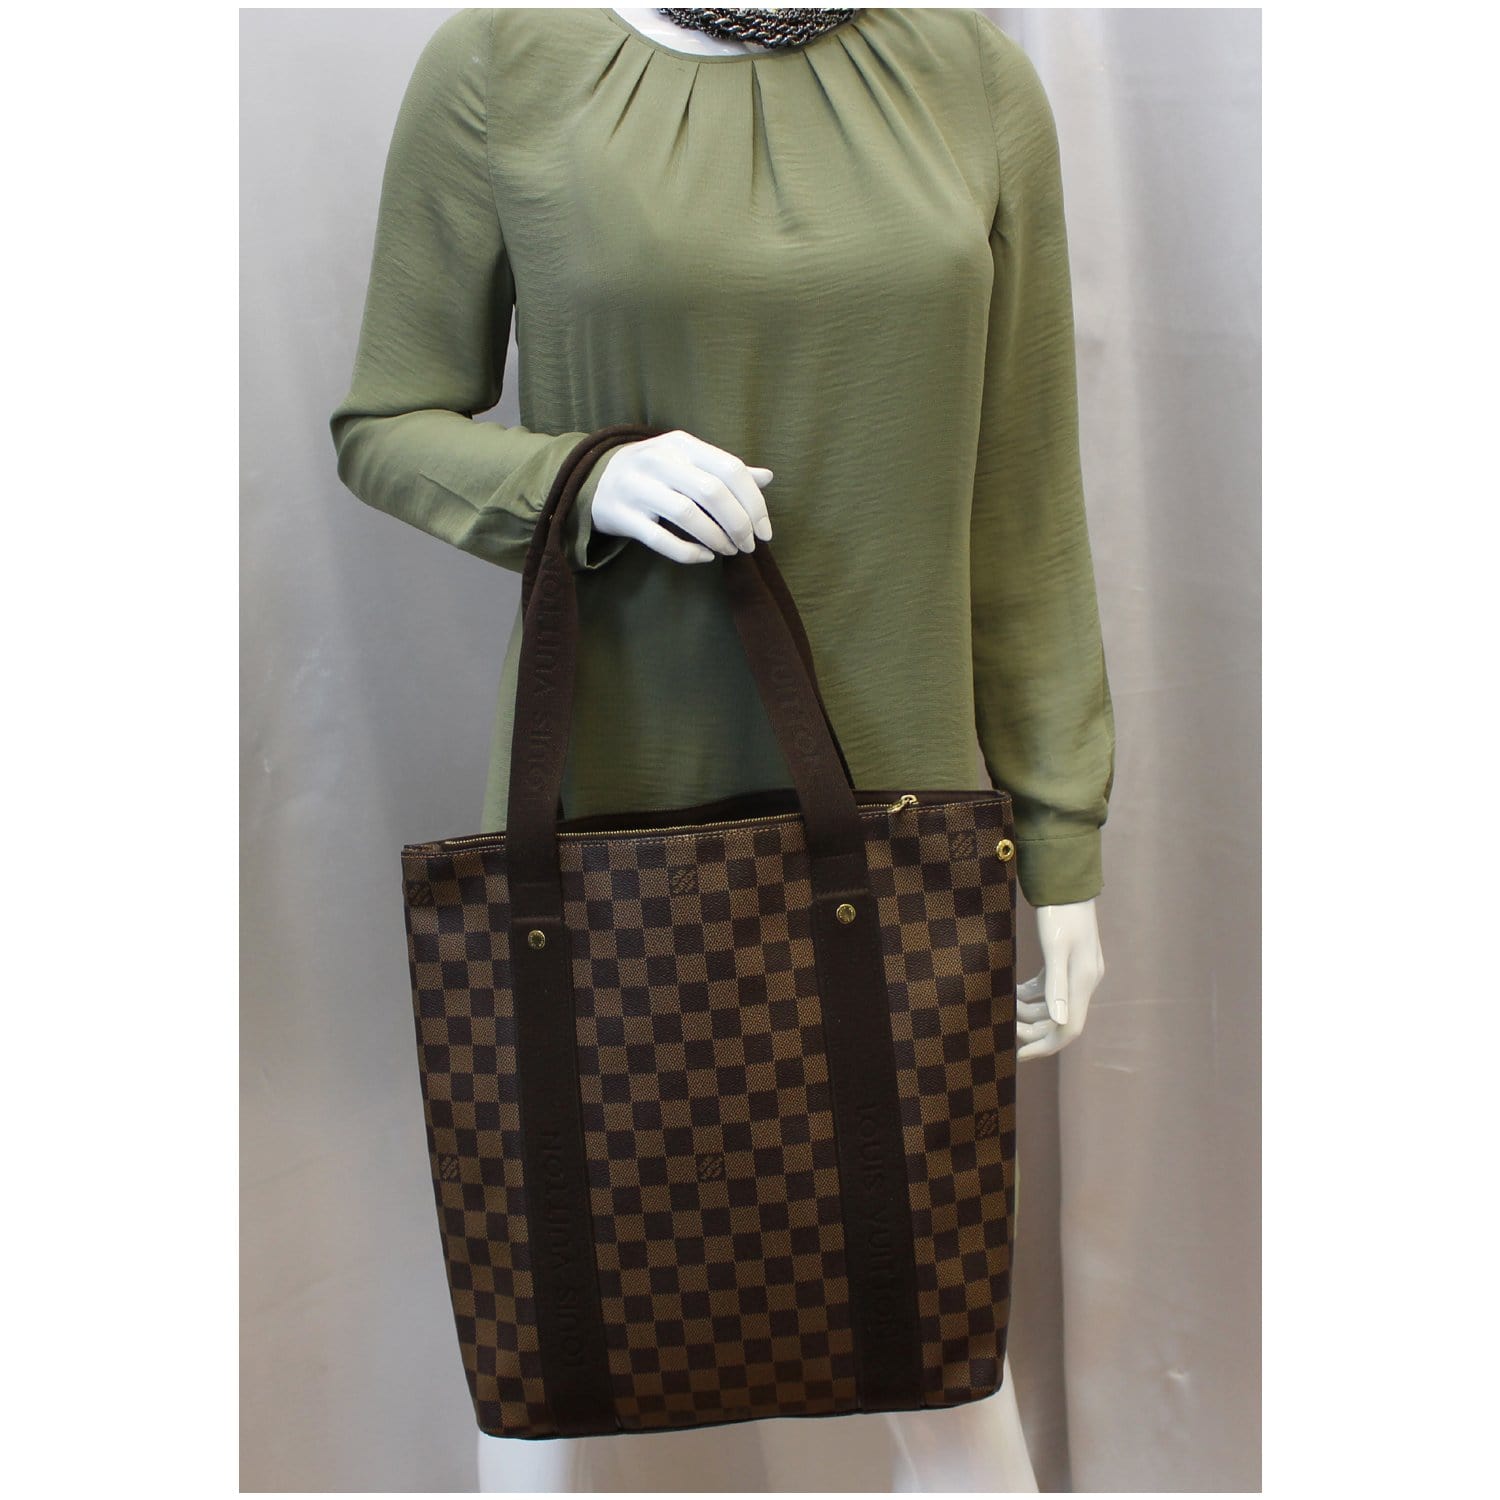 Louis Vuitton Beaubourg shopping bag in ebene damier canvas and brown canvas